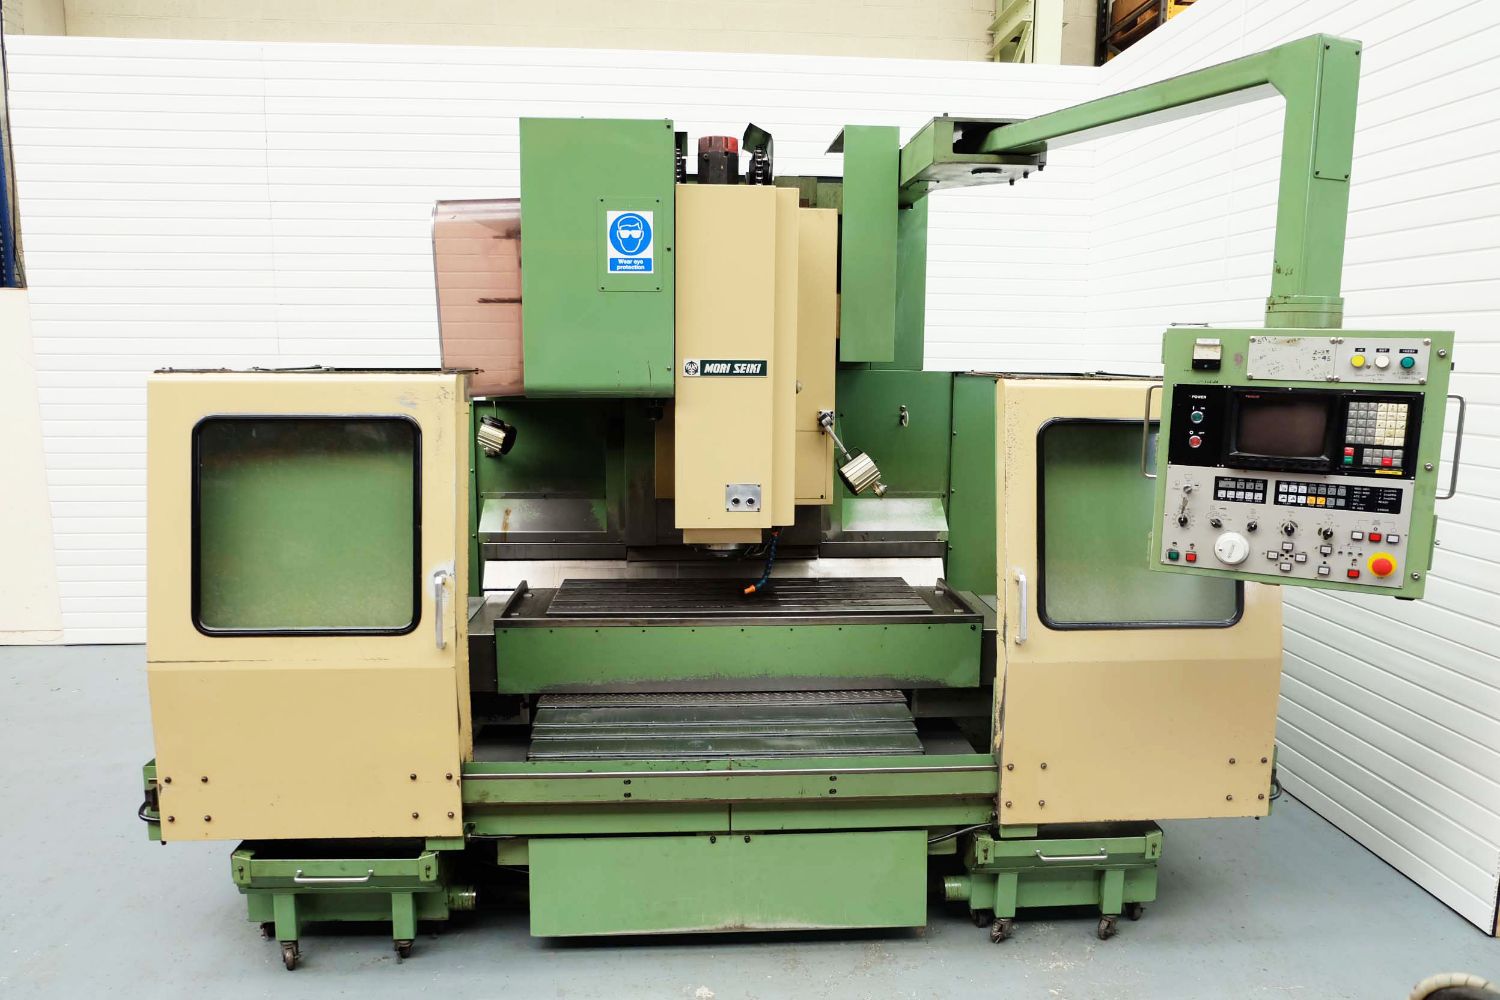 CNC and Conventional Machinery Re-Listed due to Exhausted Export